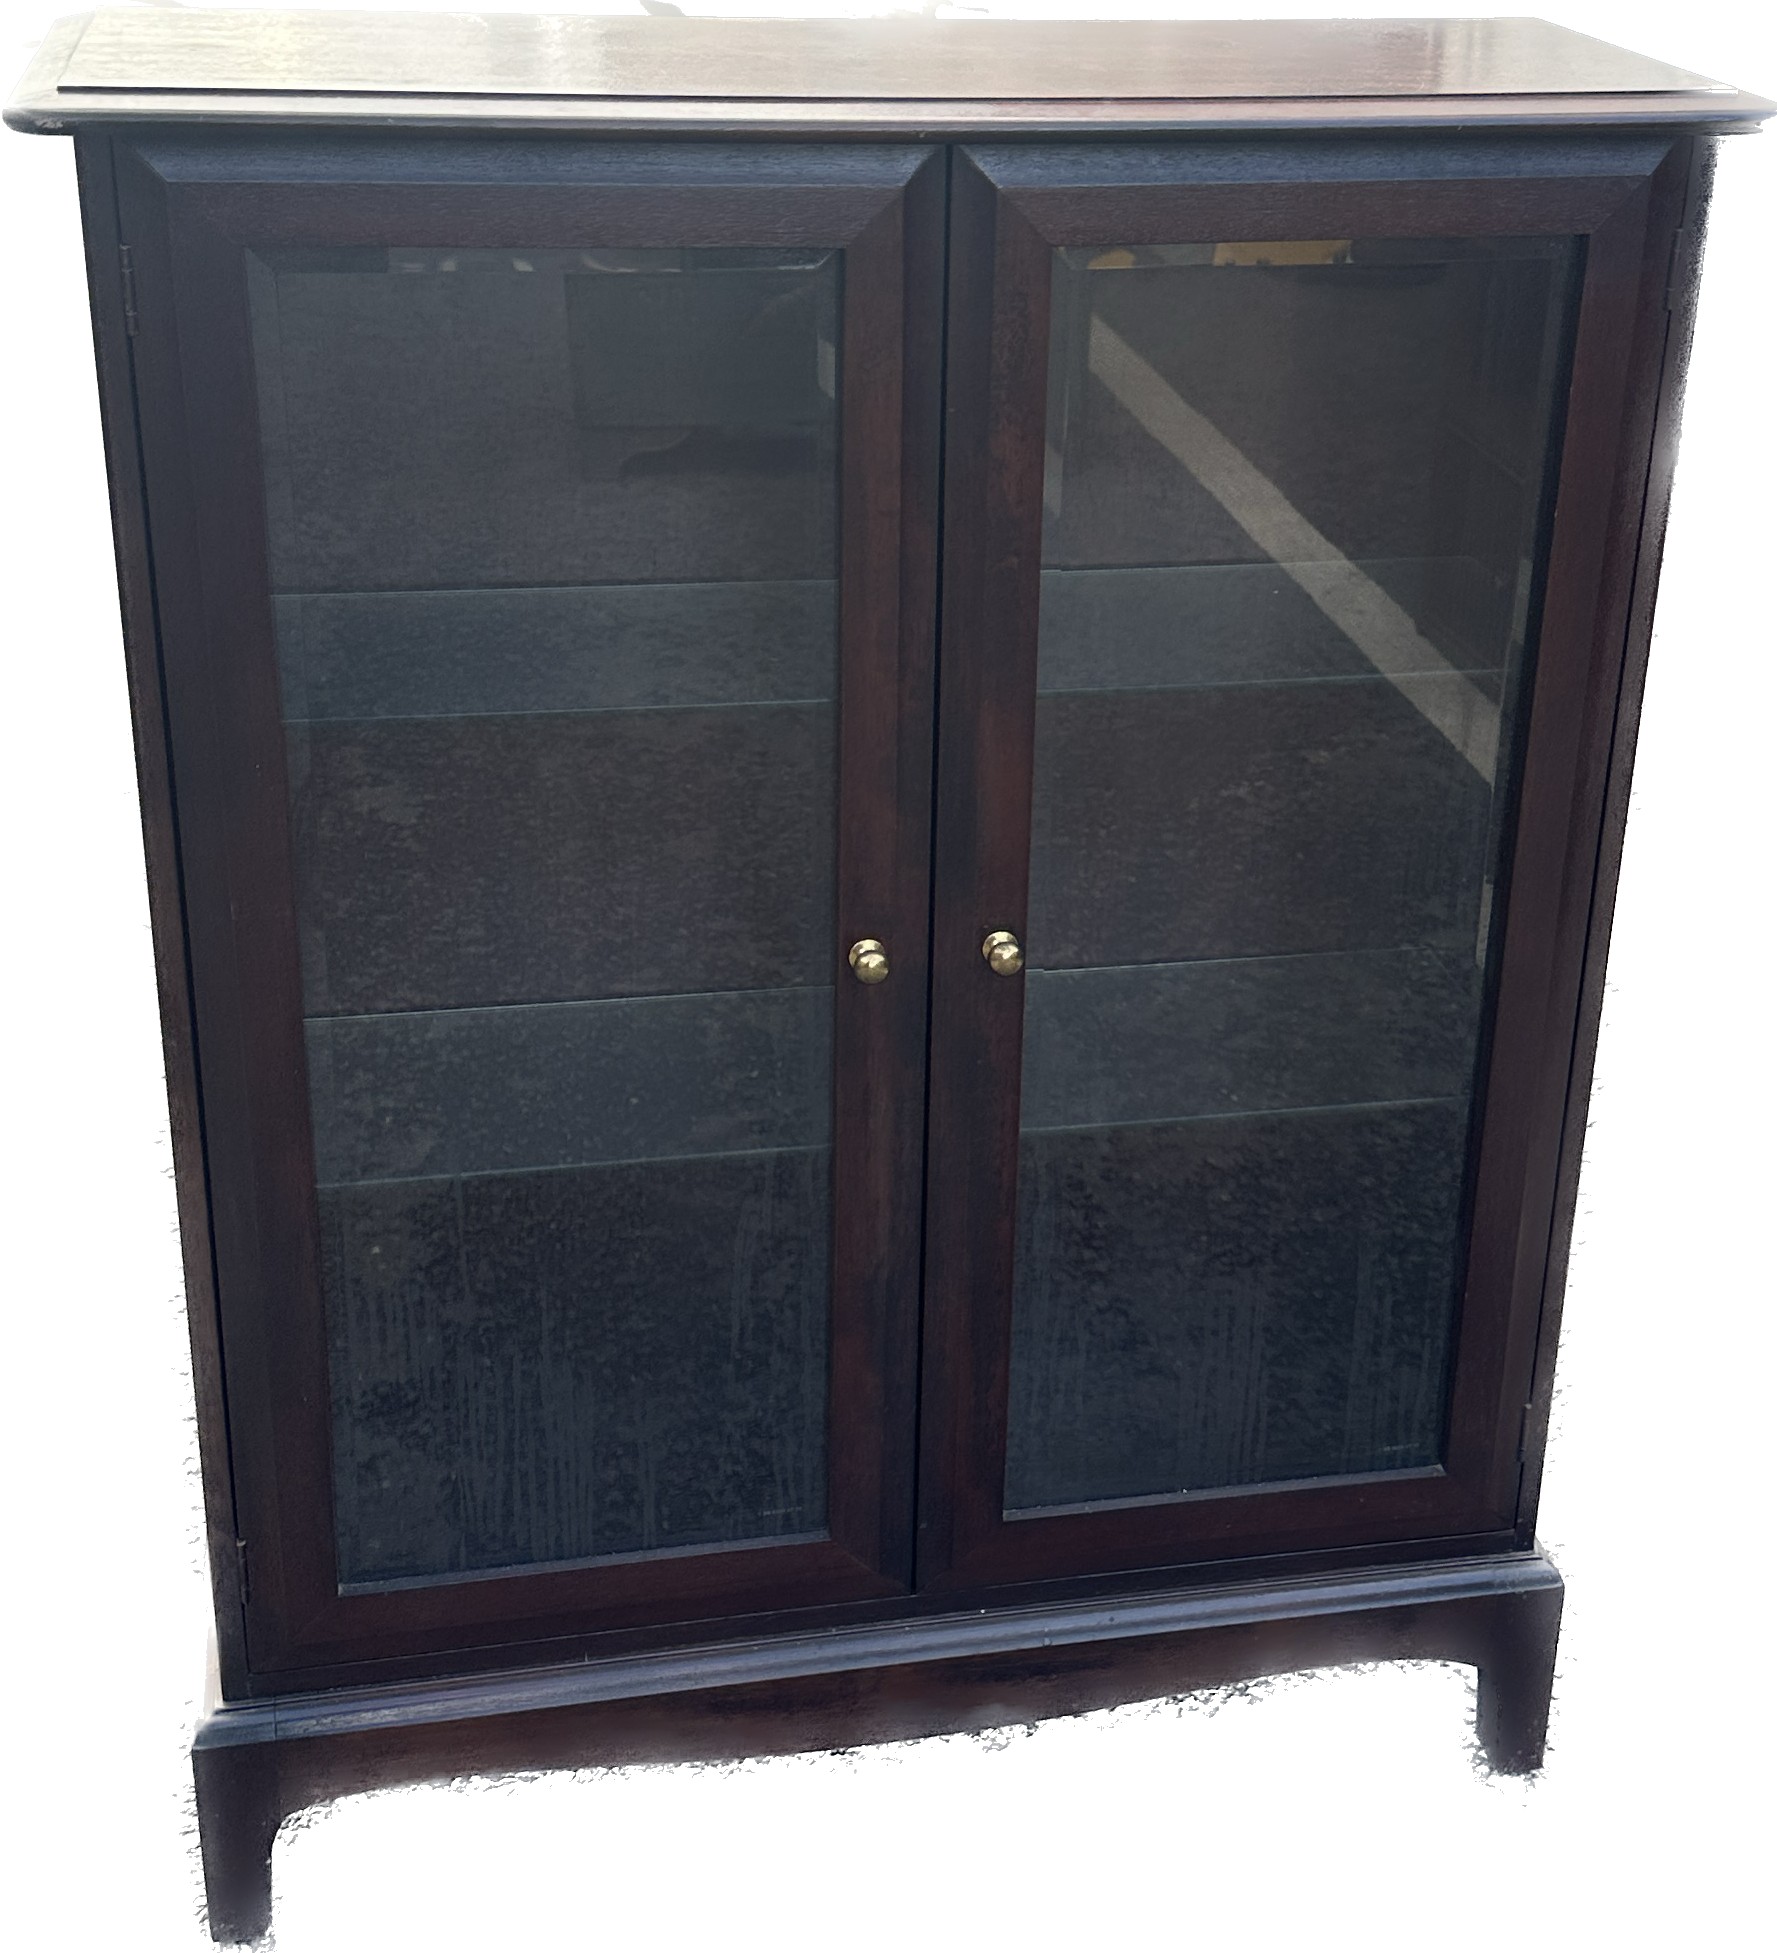 Stag glazed bookcase with glass shelves measures approximately 39 inches tall 32 inches wide 11